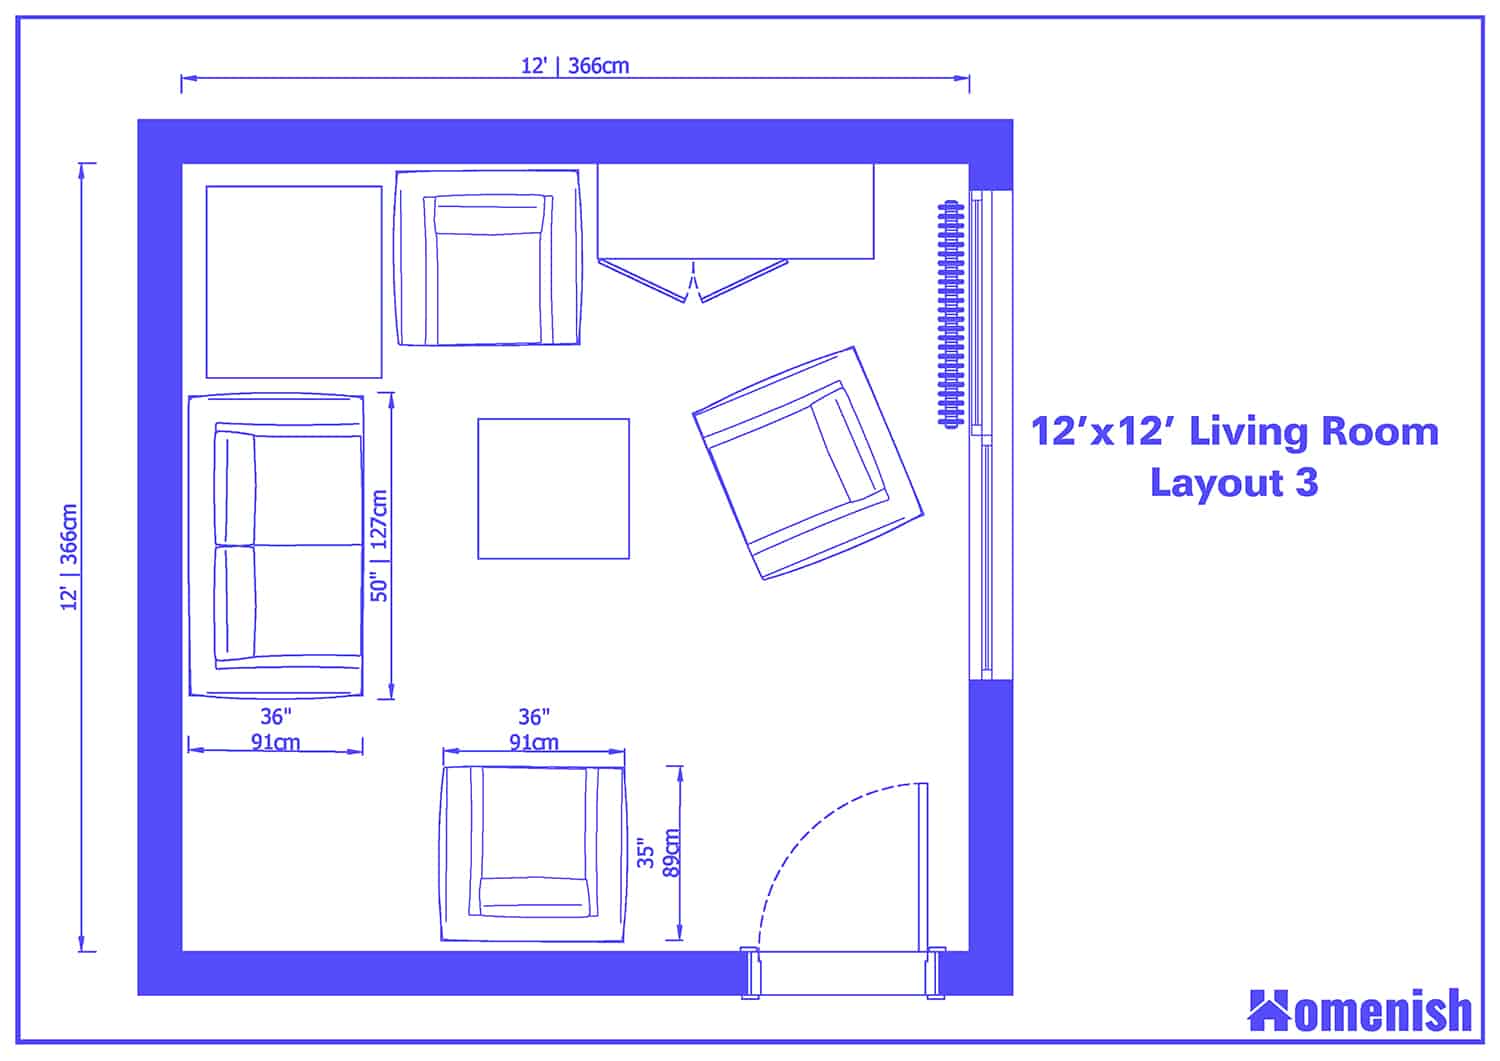 12 By 12 Living Room Layout